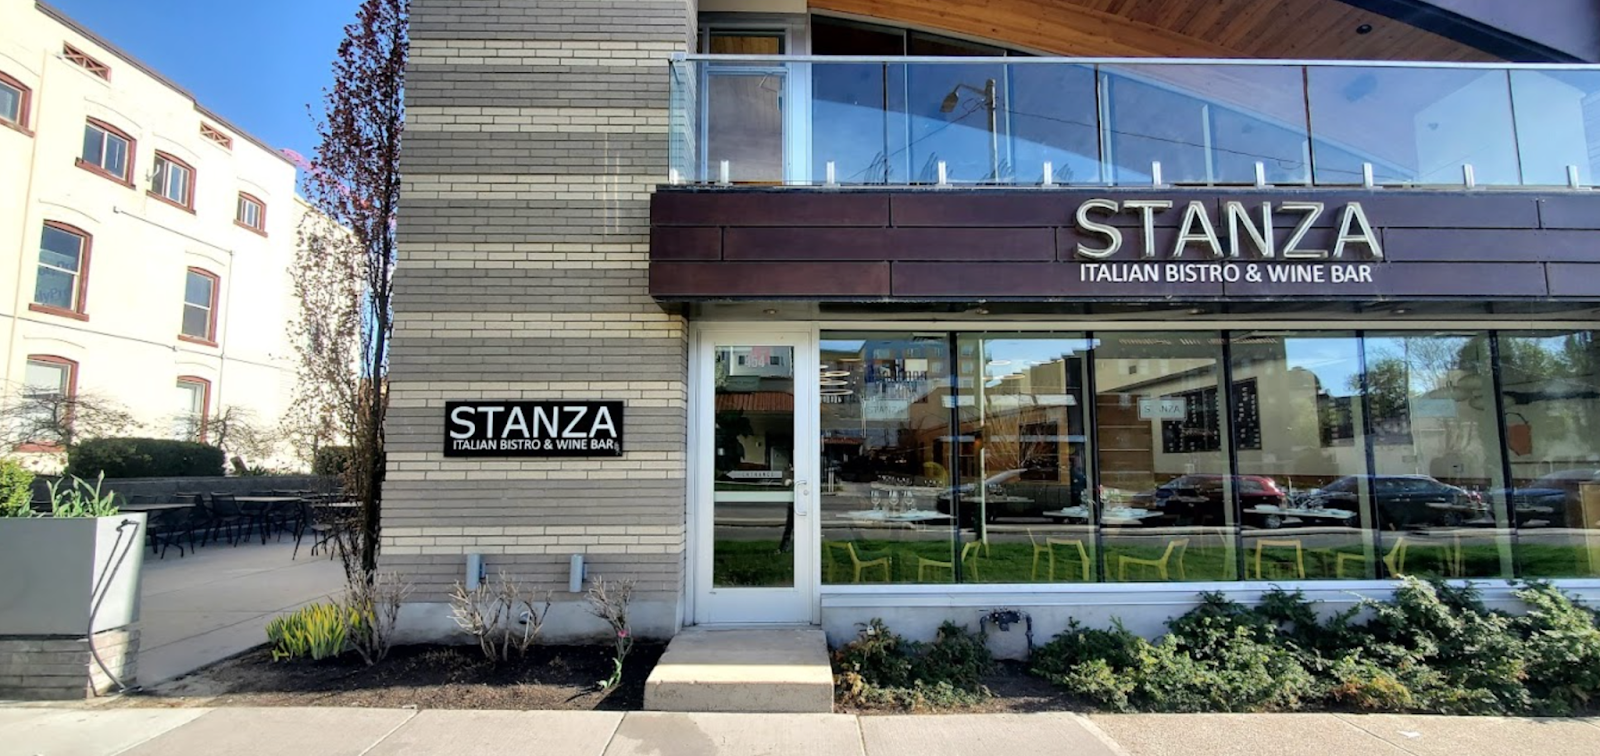 Front facade of the two story restaurant Stanza, an Italian bistro and wine bar.